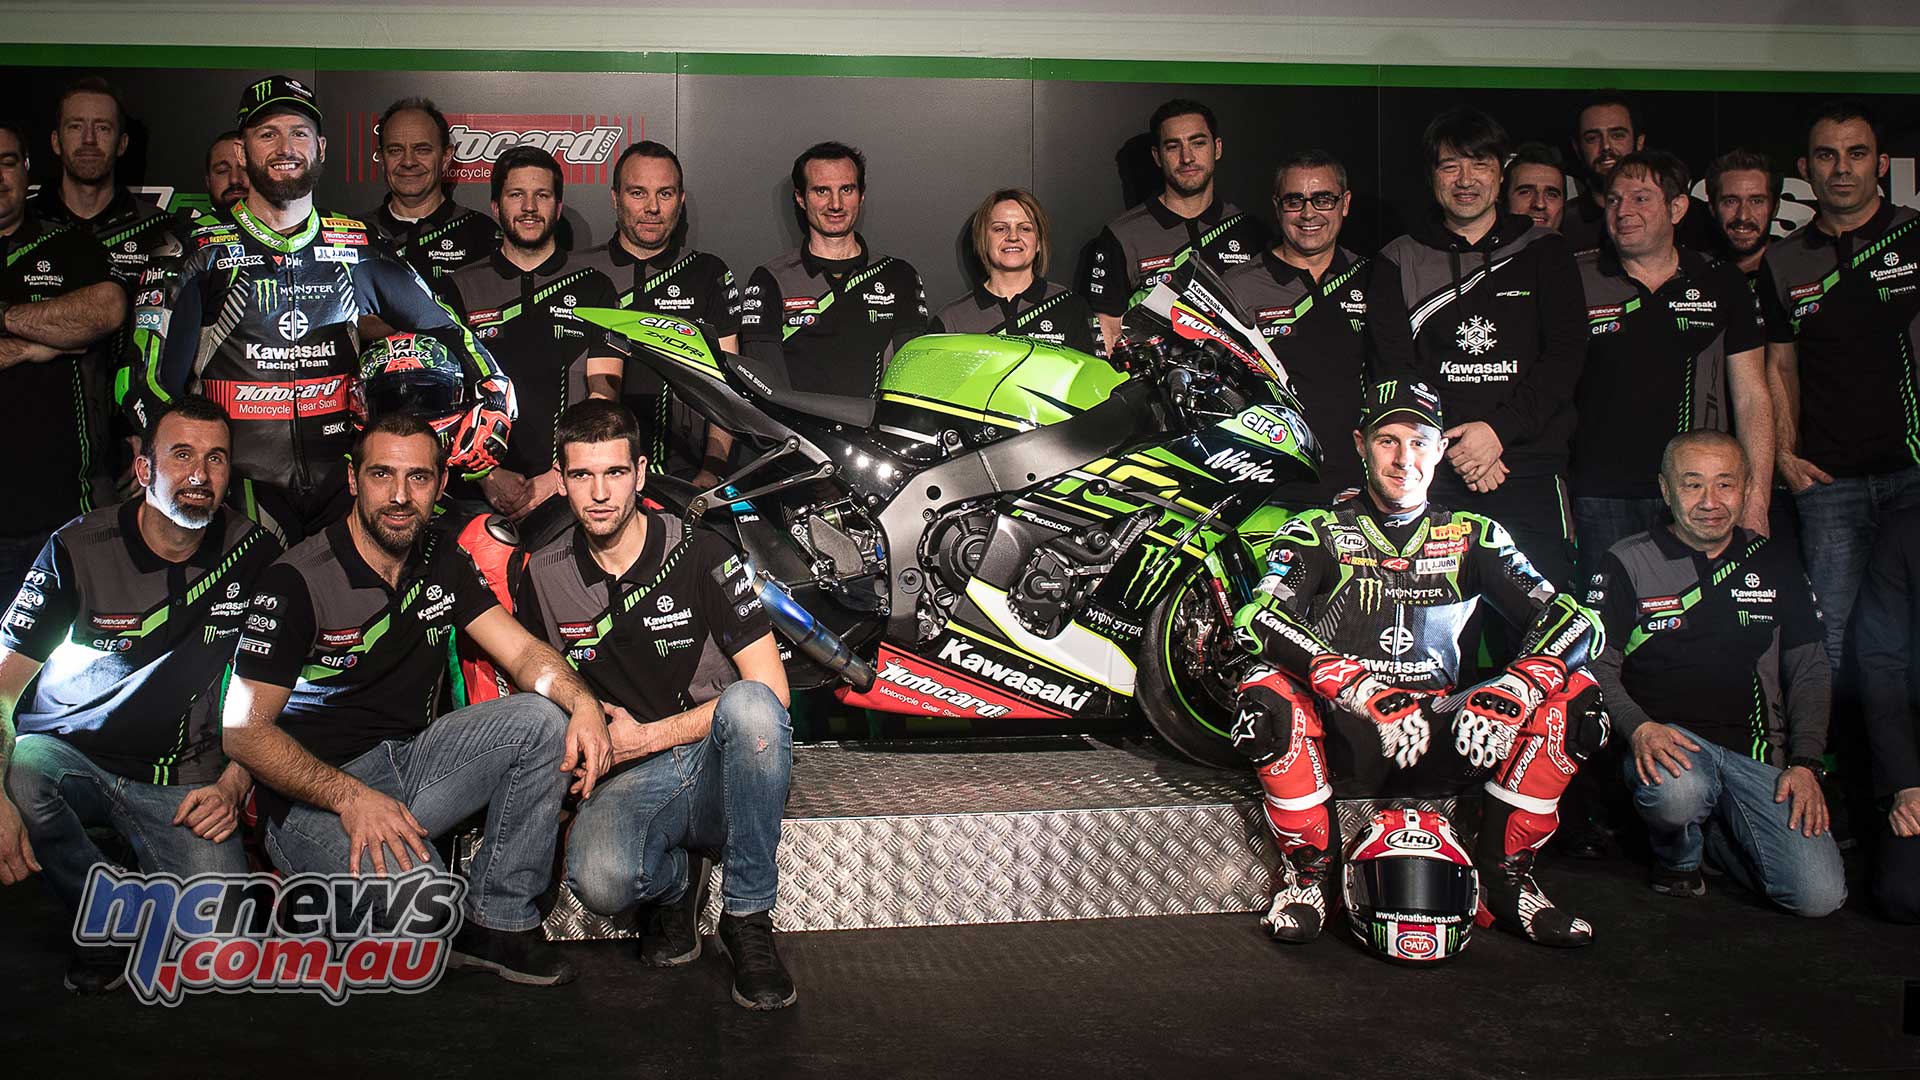 Kawasaki Prepare Wsbk Defence With 1100 Less Rpm Motorcycle News Sport And Reviews